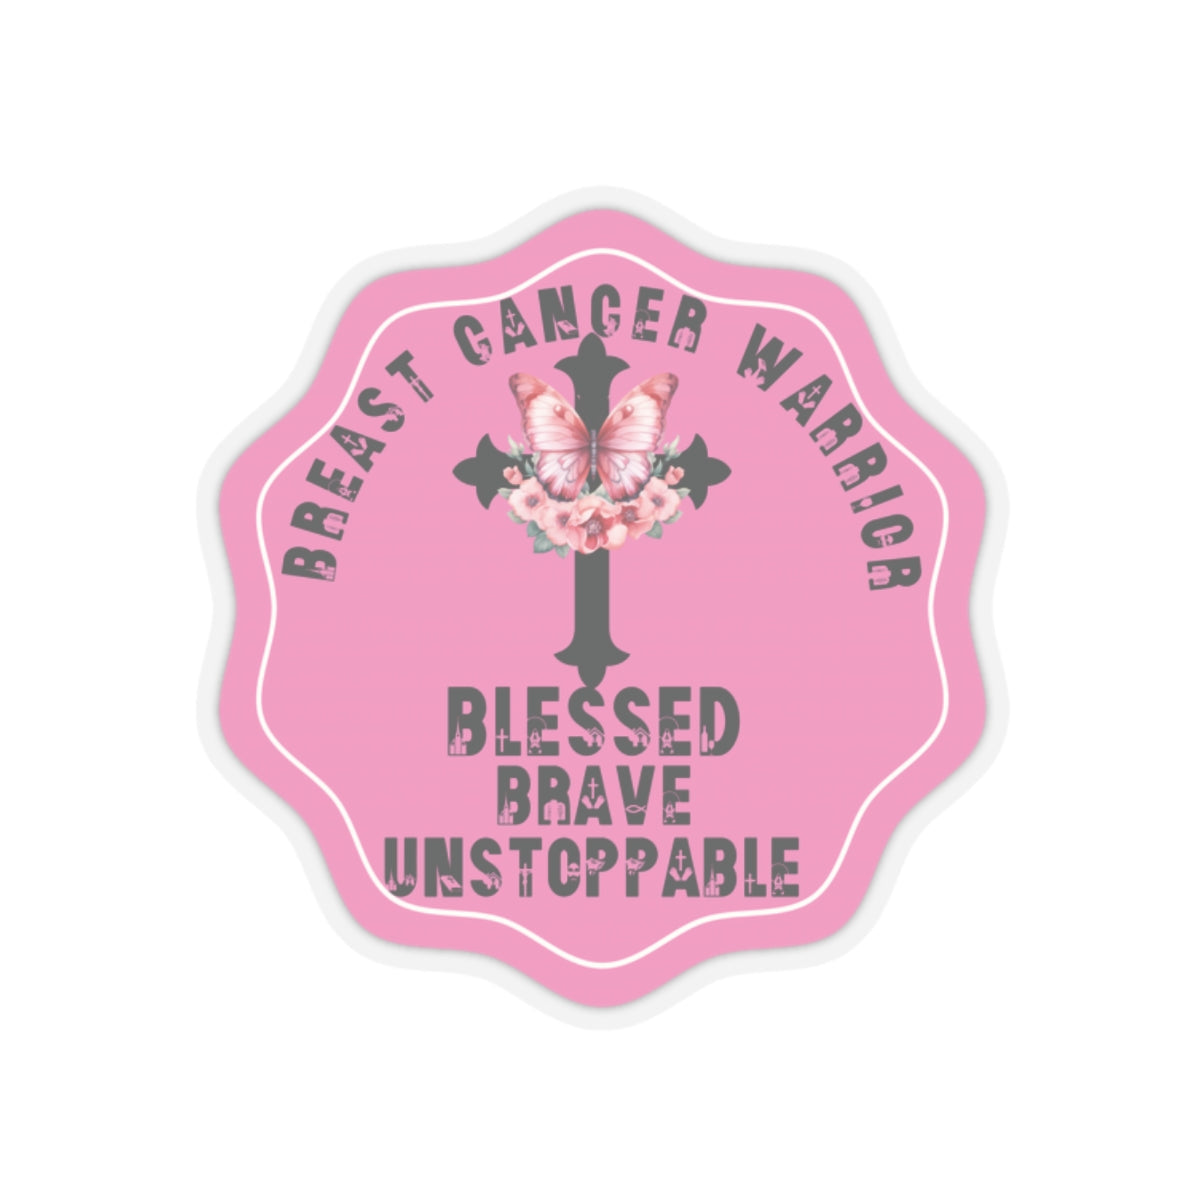 Blessed Breast Cancer Warrior Motivational Quote Kiss-Cut Stickers-Paper products-2" × 2"-Transparent-mysticalcherry